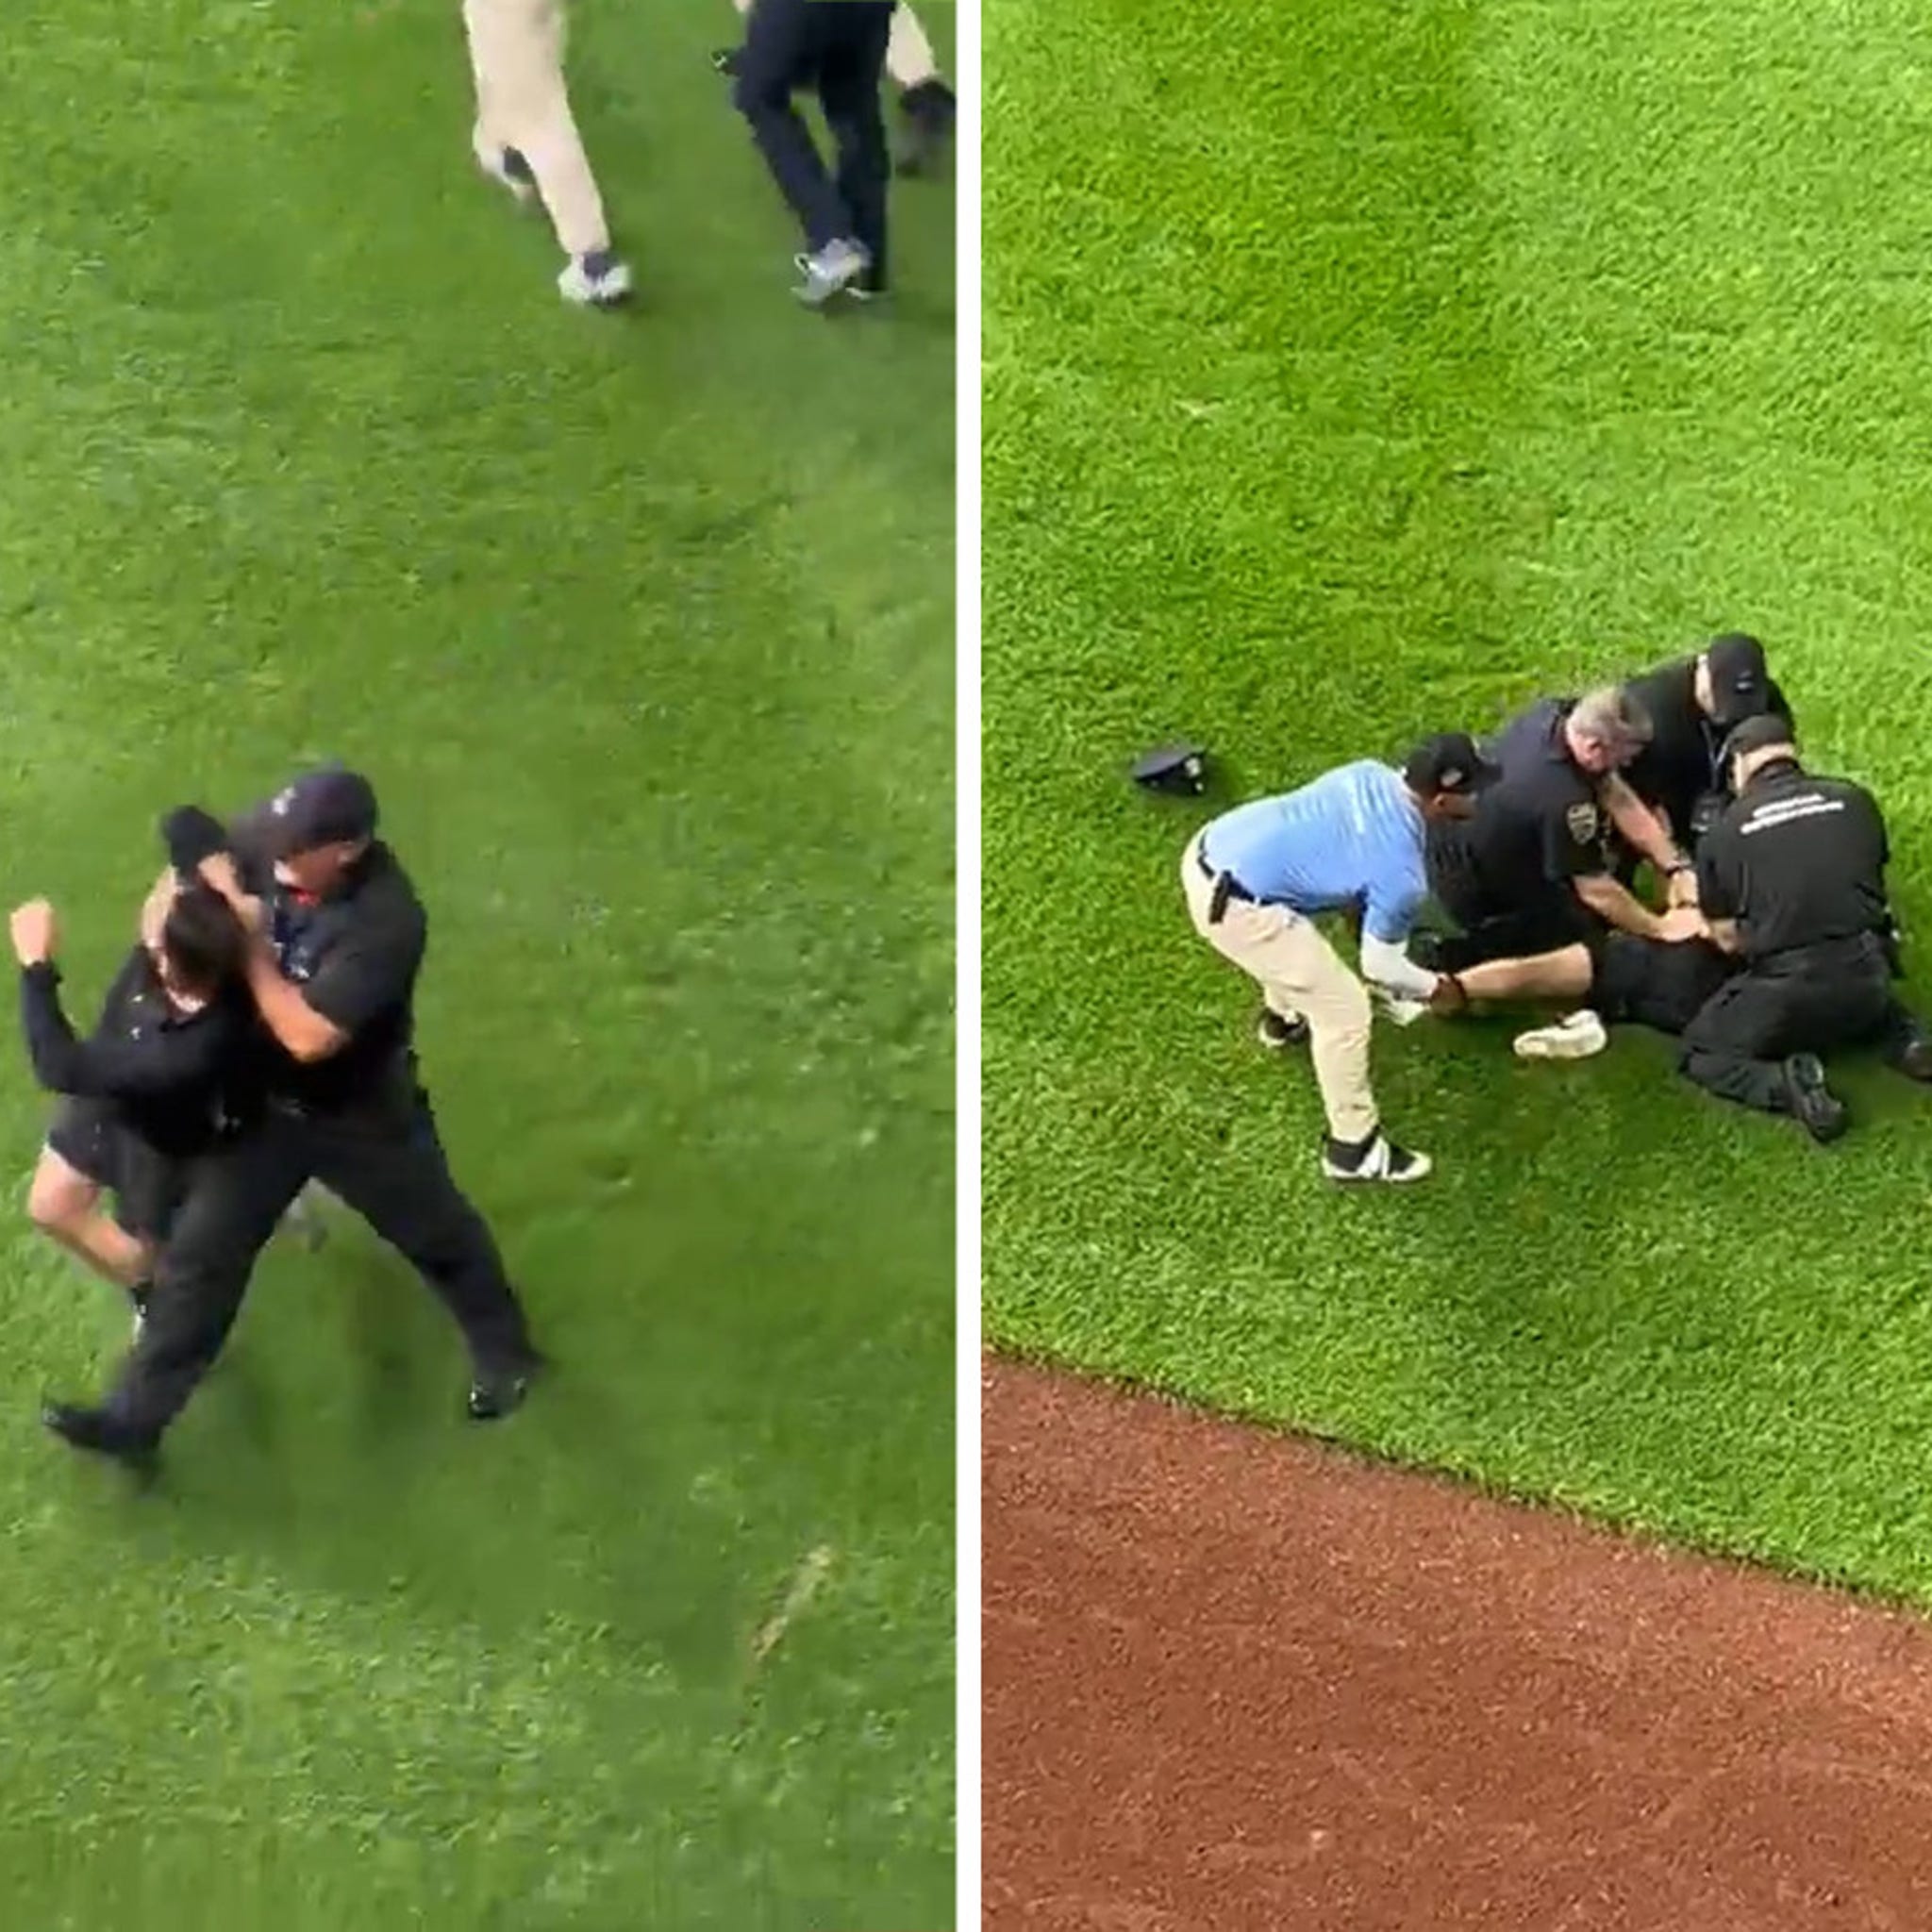 MLB bans fan indefinitely after running on field during 2022 ALCS